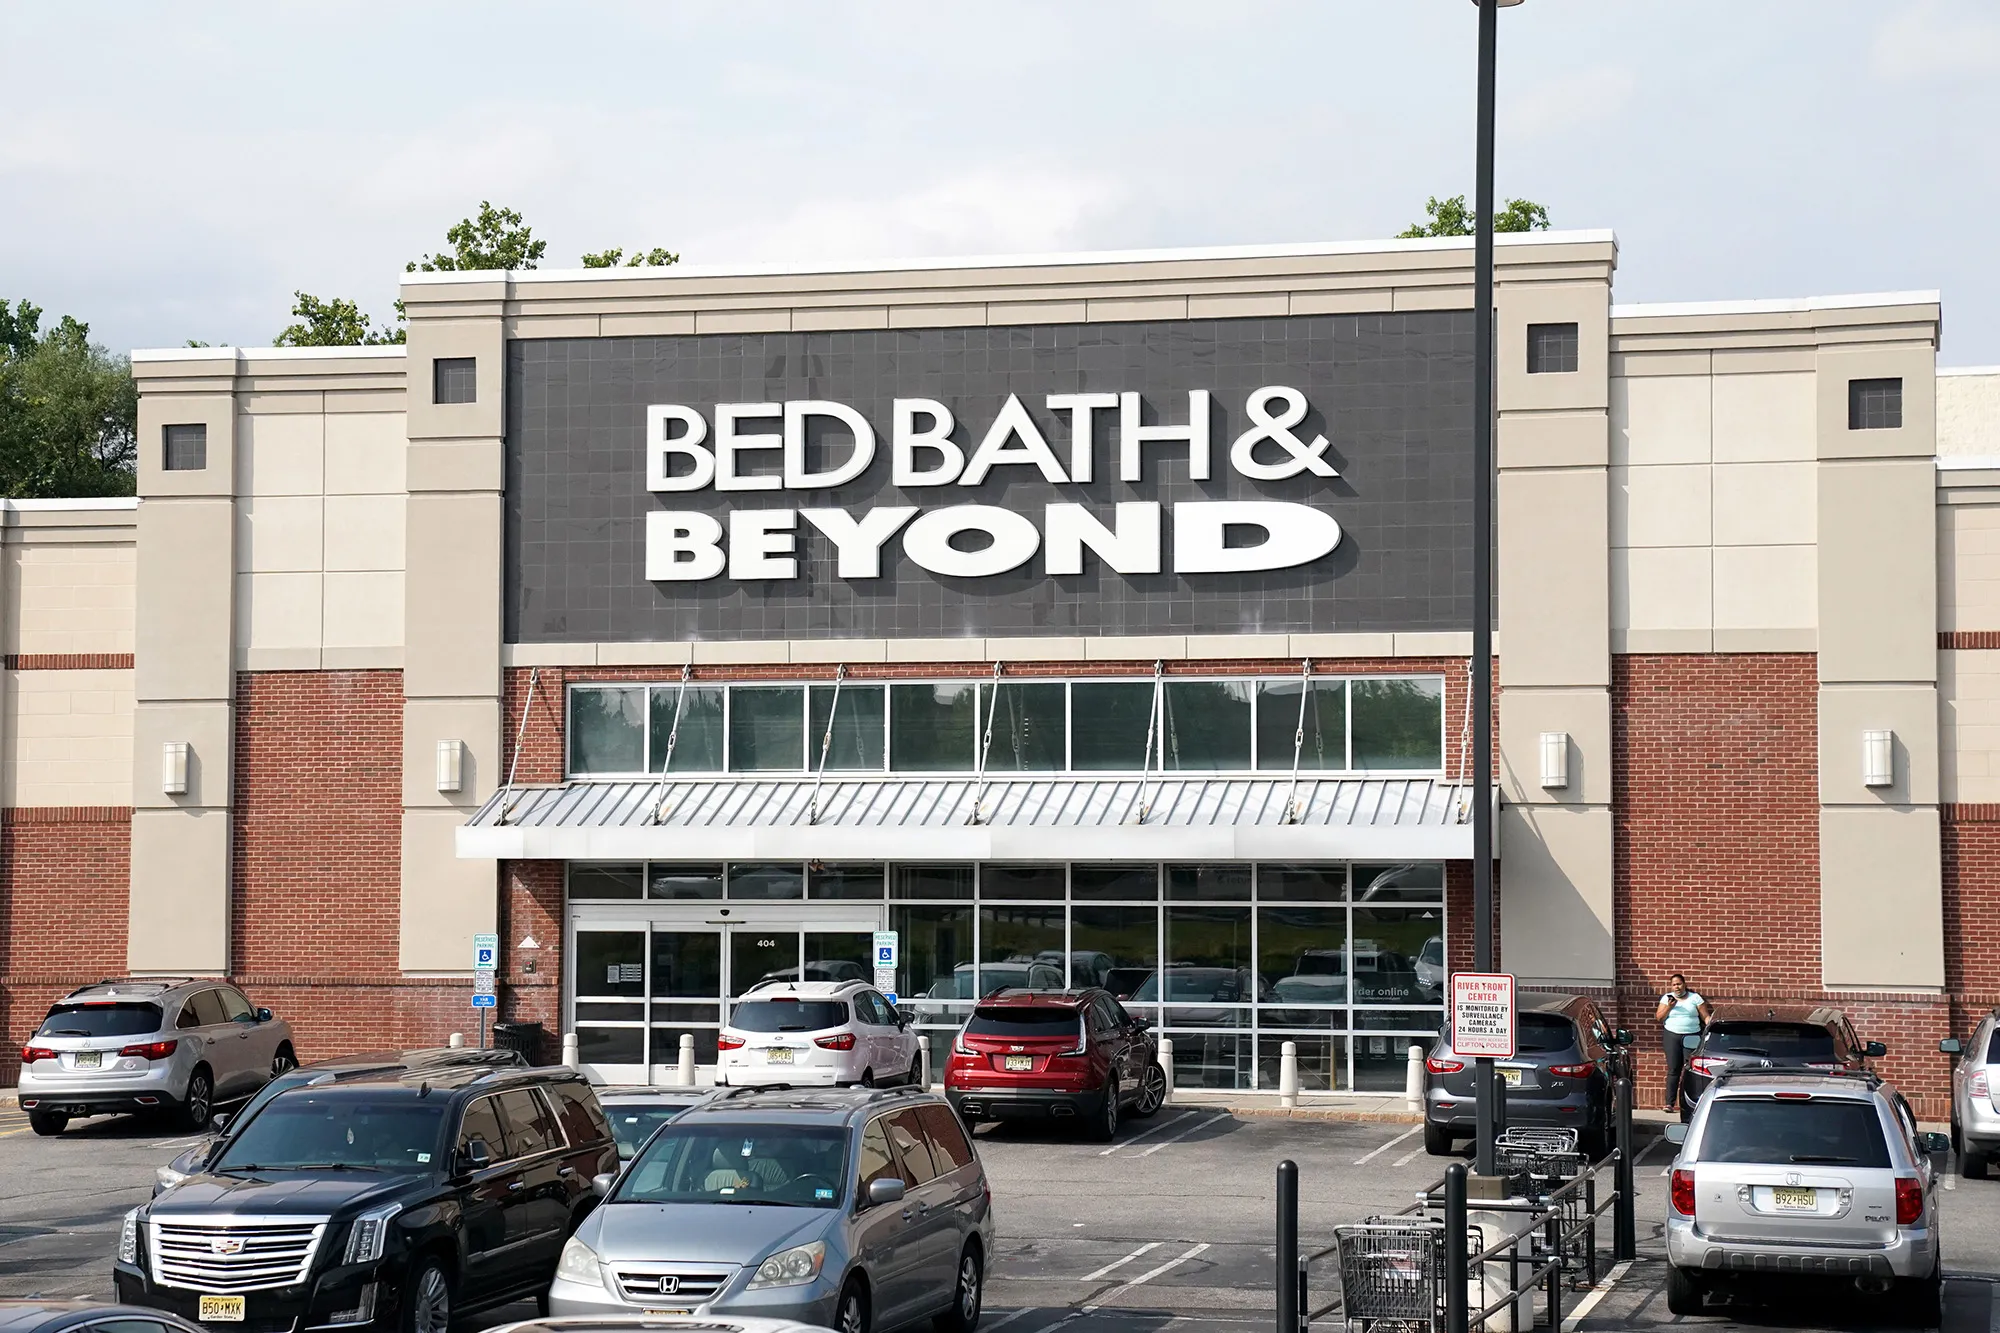 Bed Bath and Beyond Hours